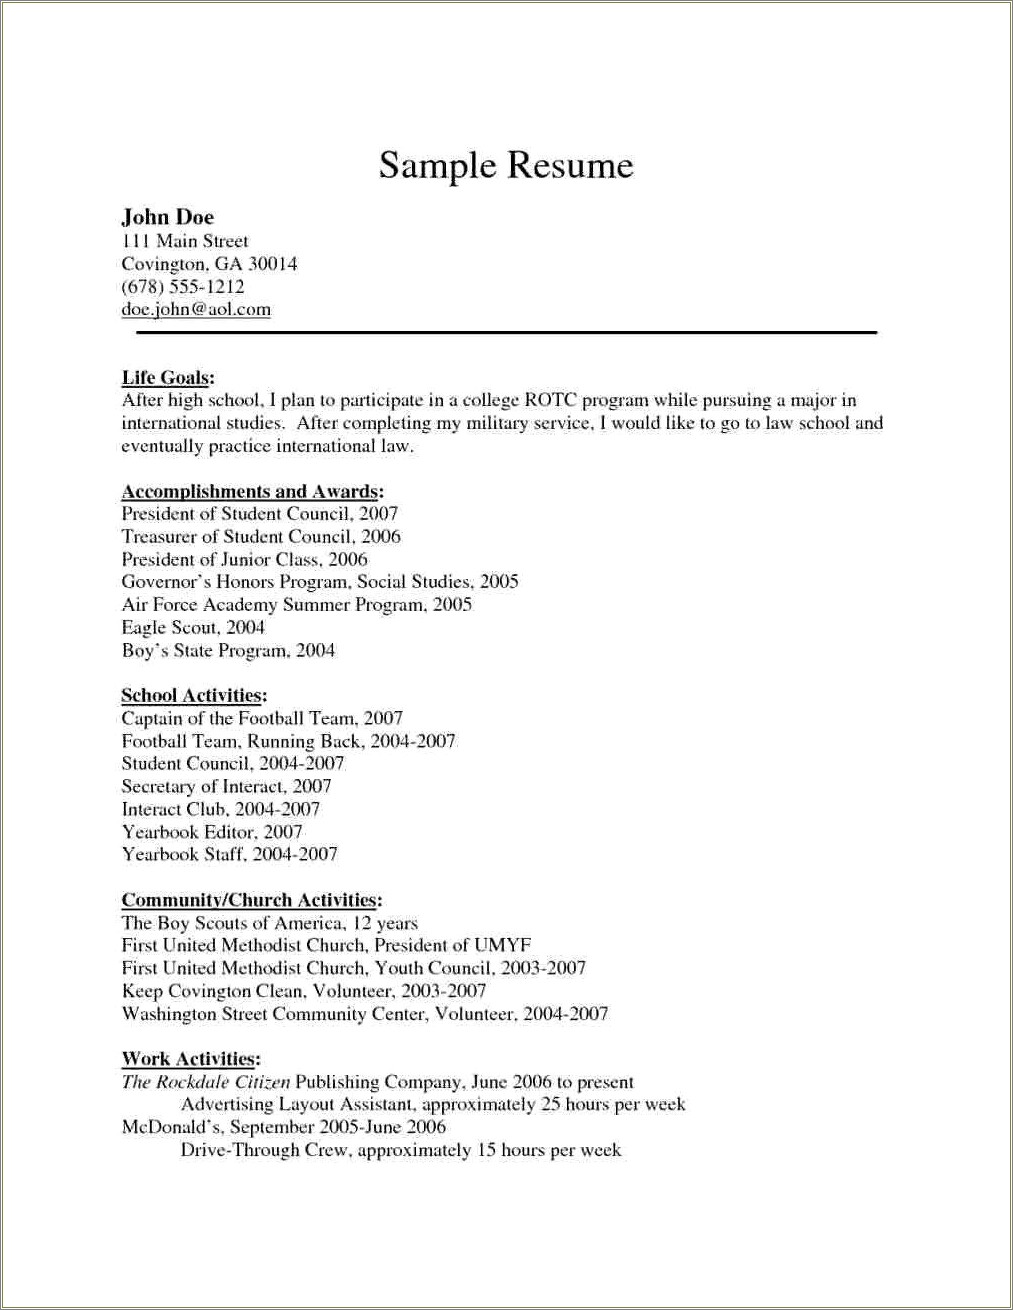 Where To Put Eagle Scout On Resume